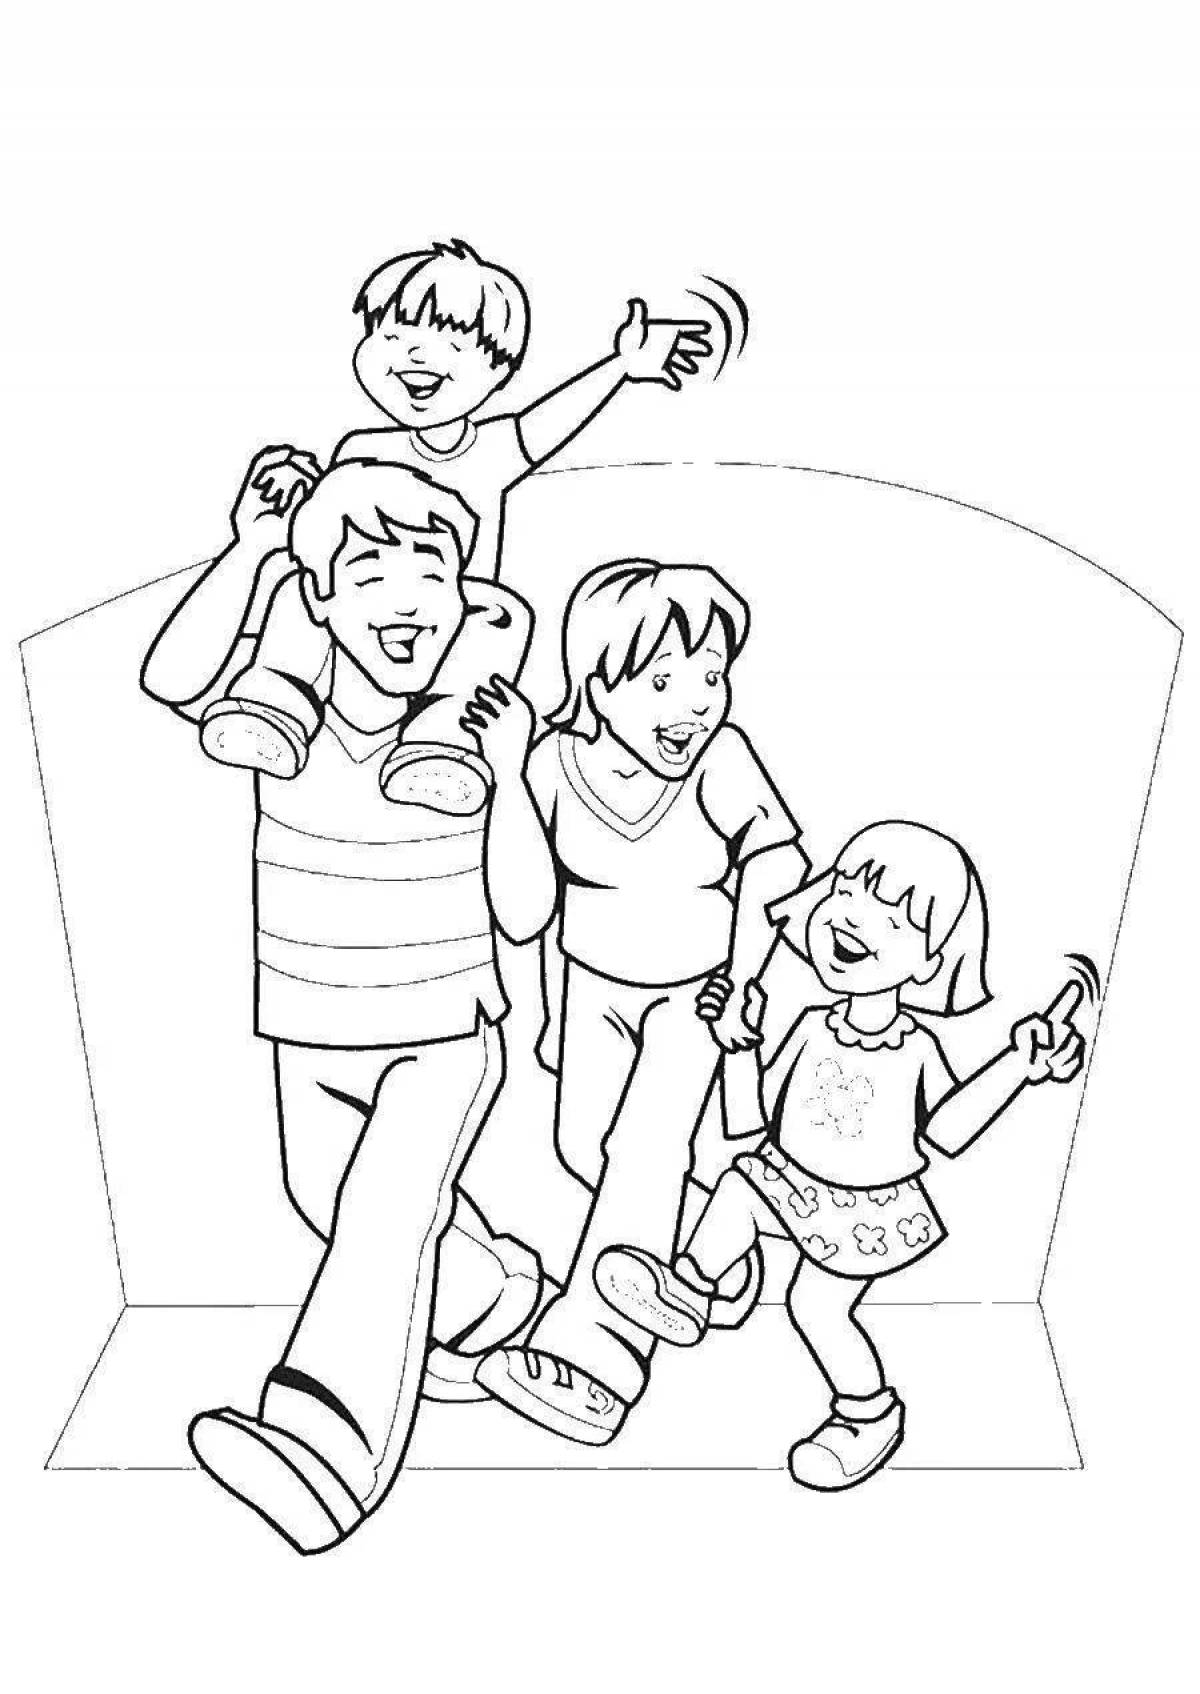 Bright sports family coloring book